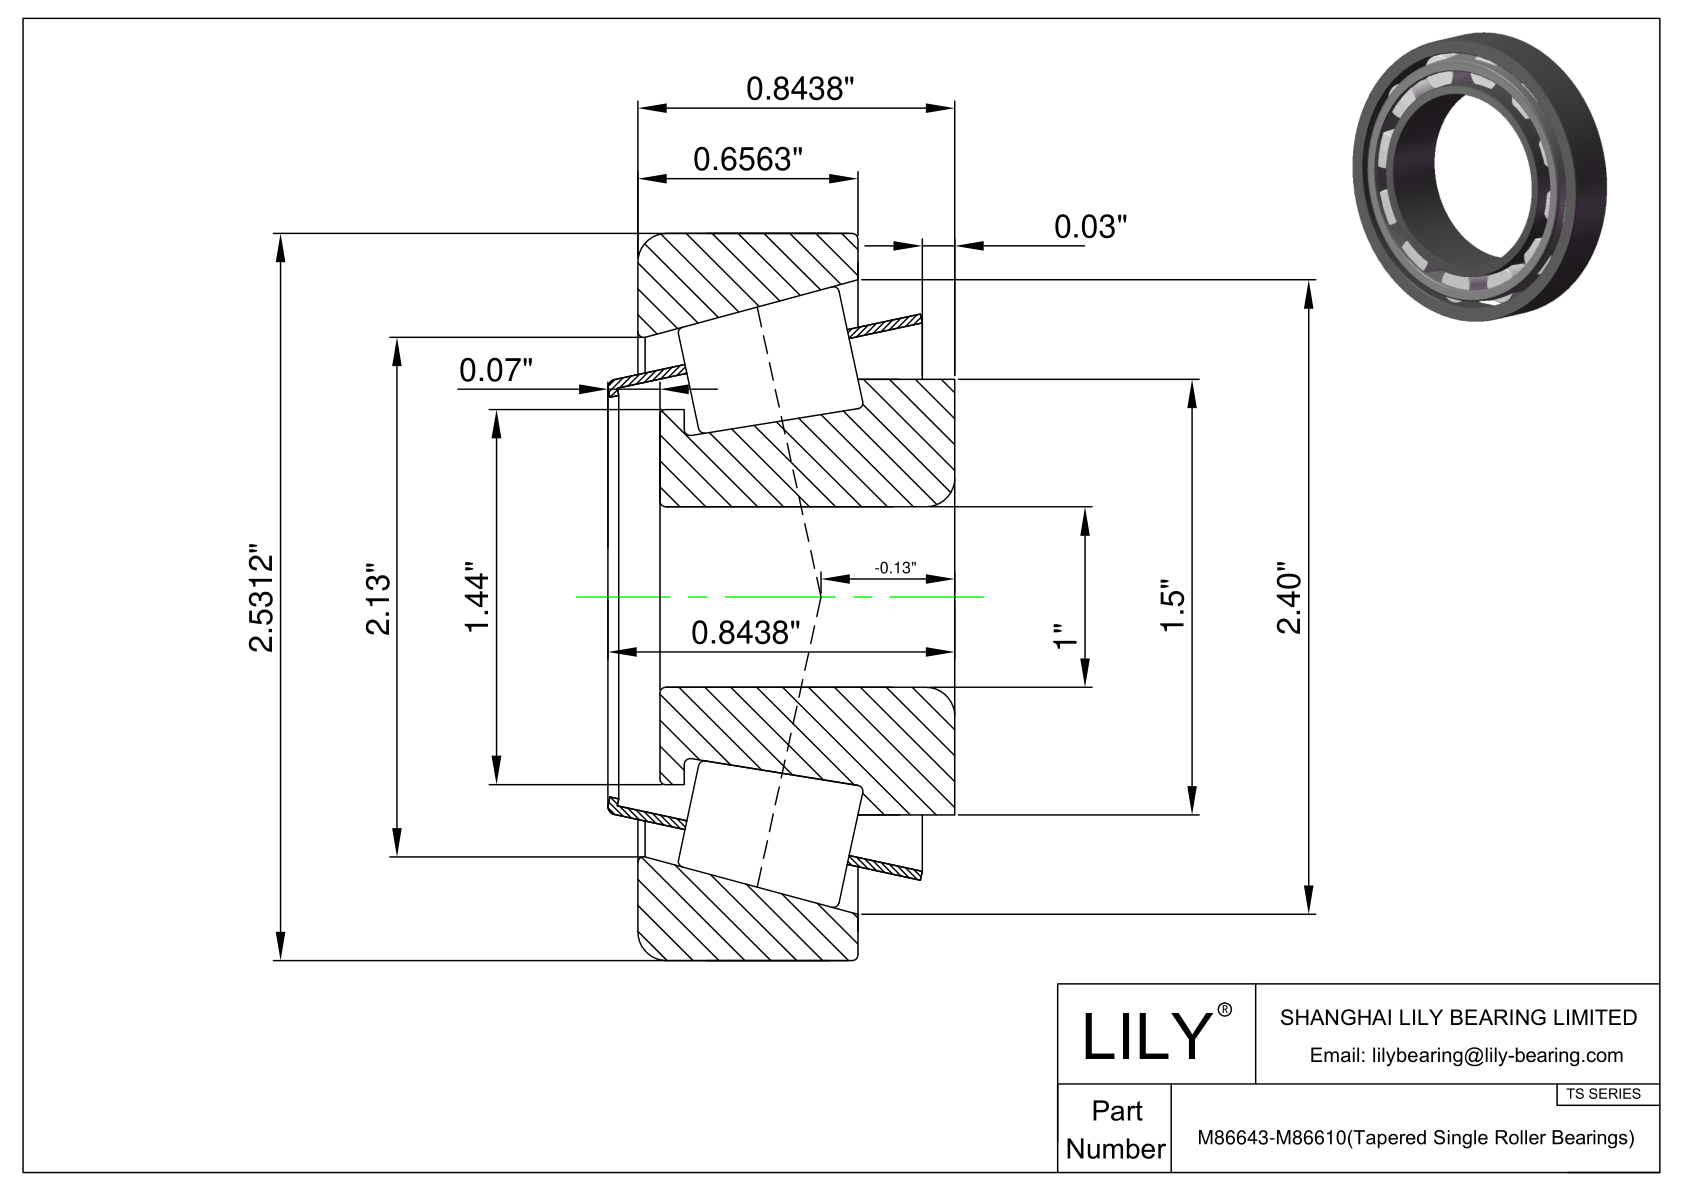 M86643-M86610 TS (Tapered Single Roller Bearings) (Imperial) cad drawing